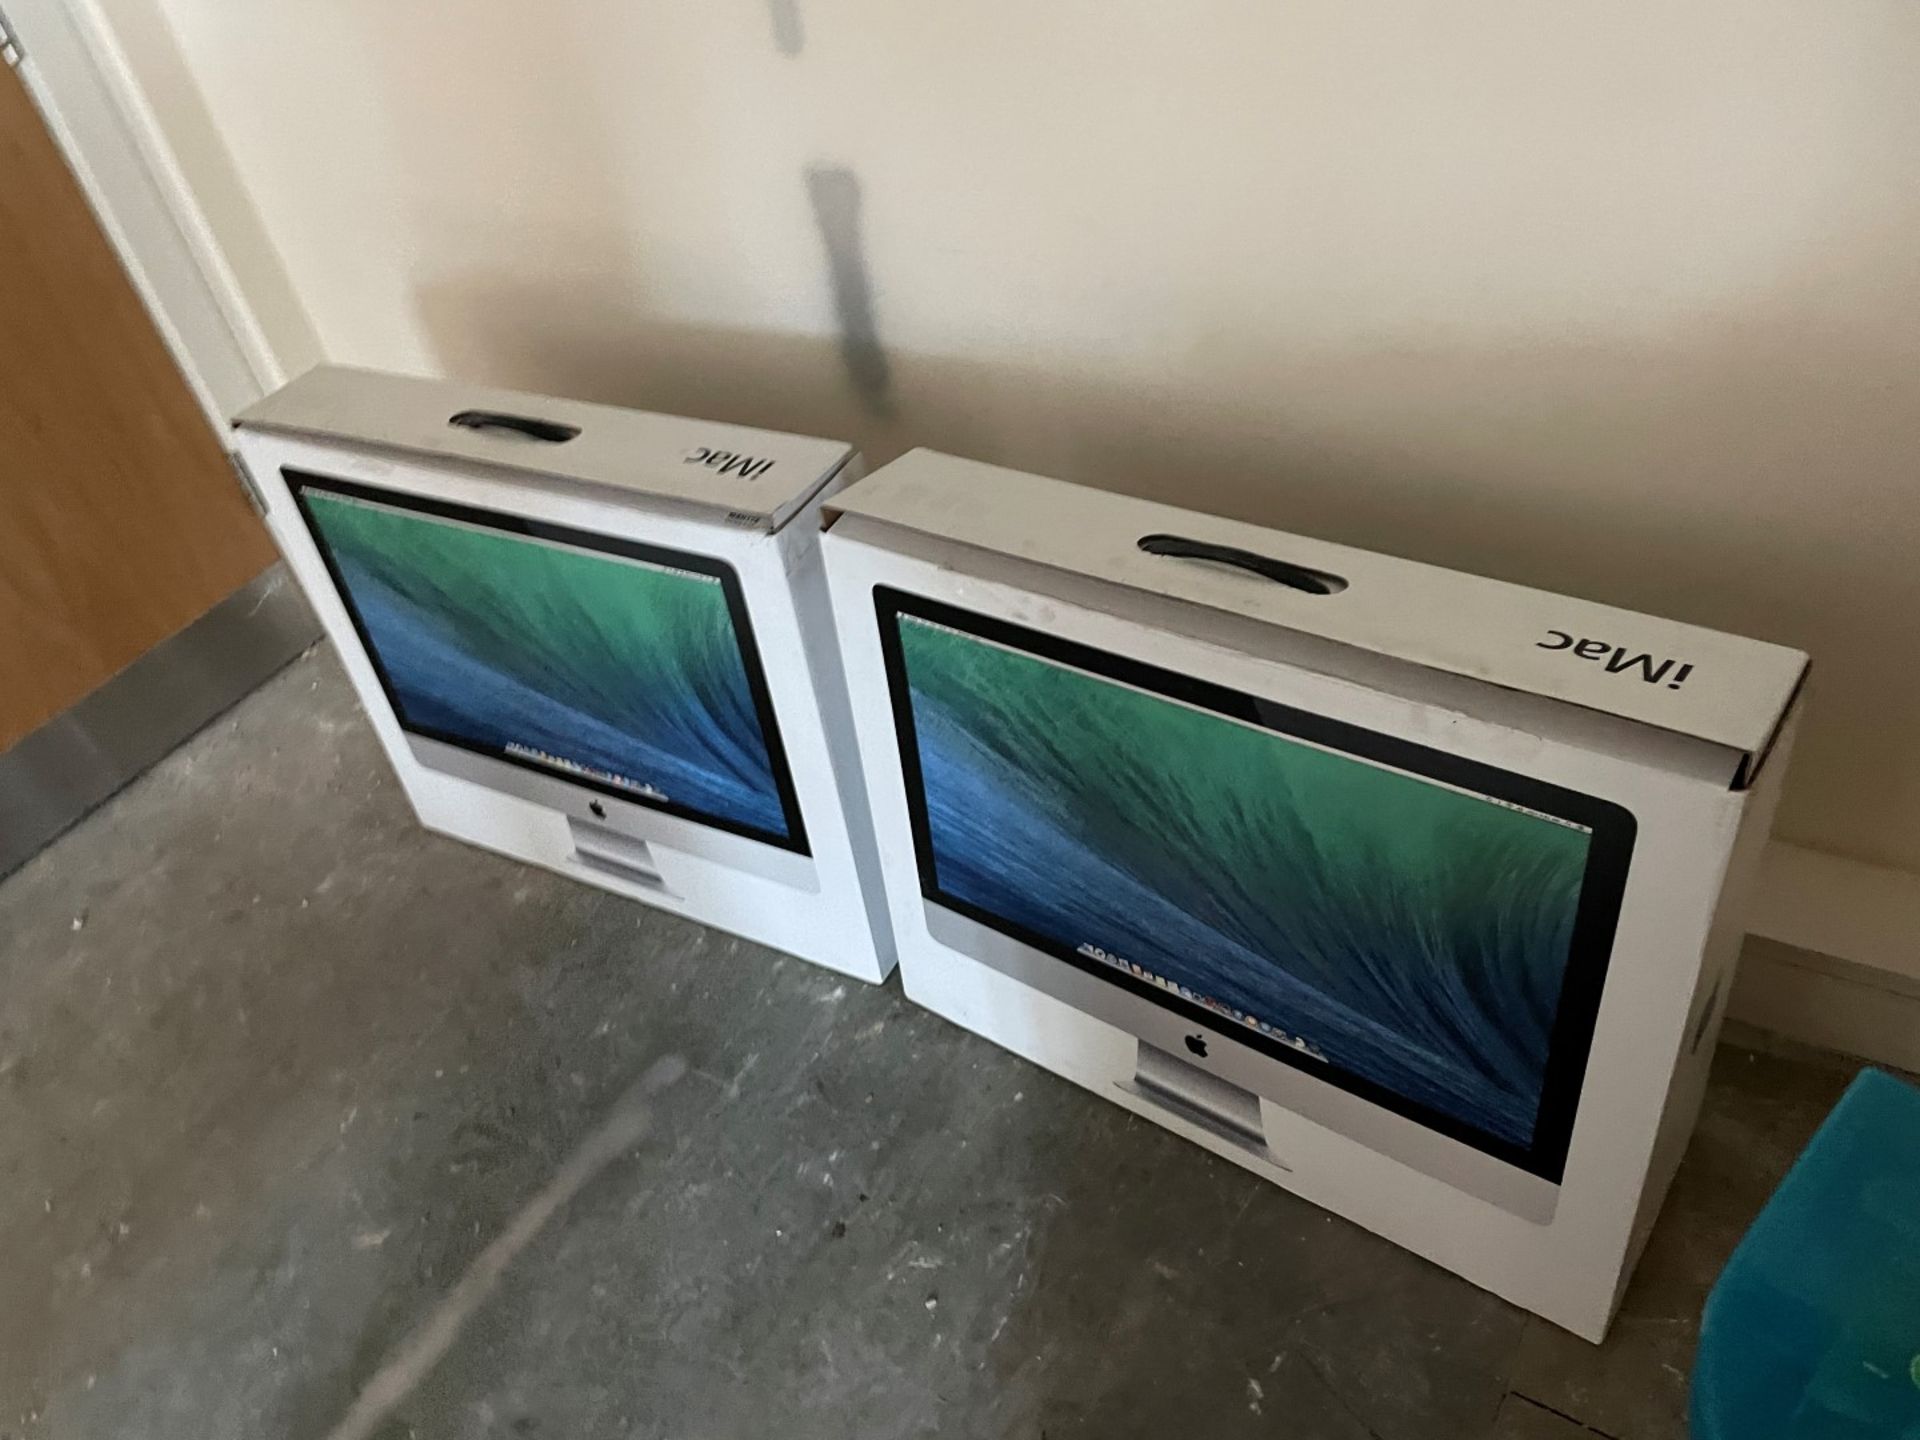 2 x Empty Imac Boxes- - From A Working Office Environment - CL680 - Ref: Man Imac Box - Location: